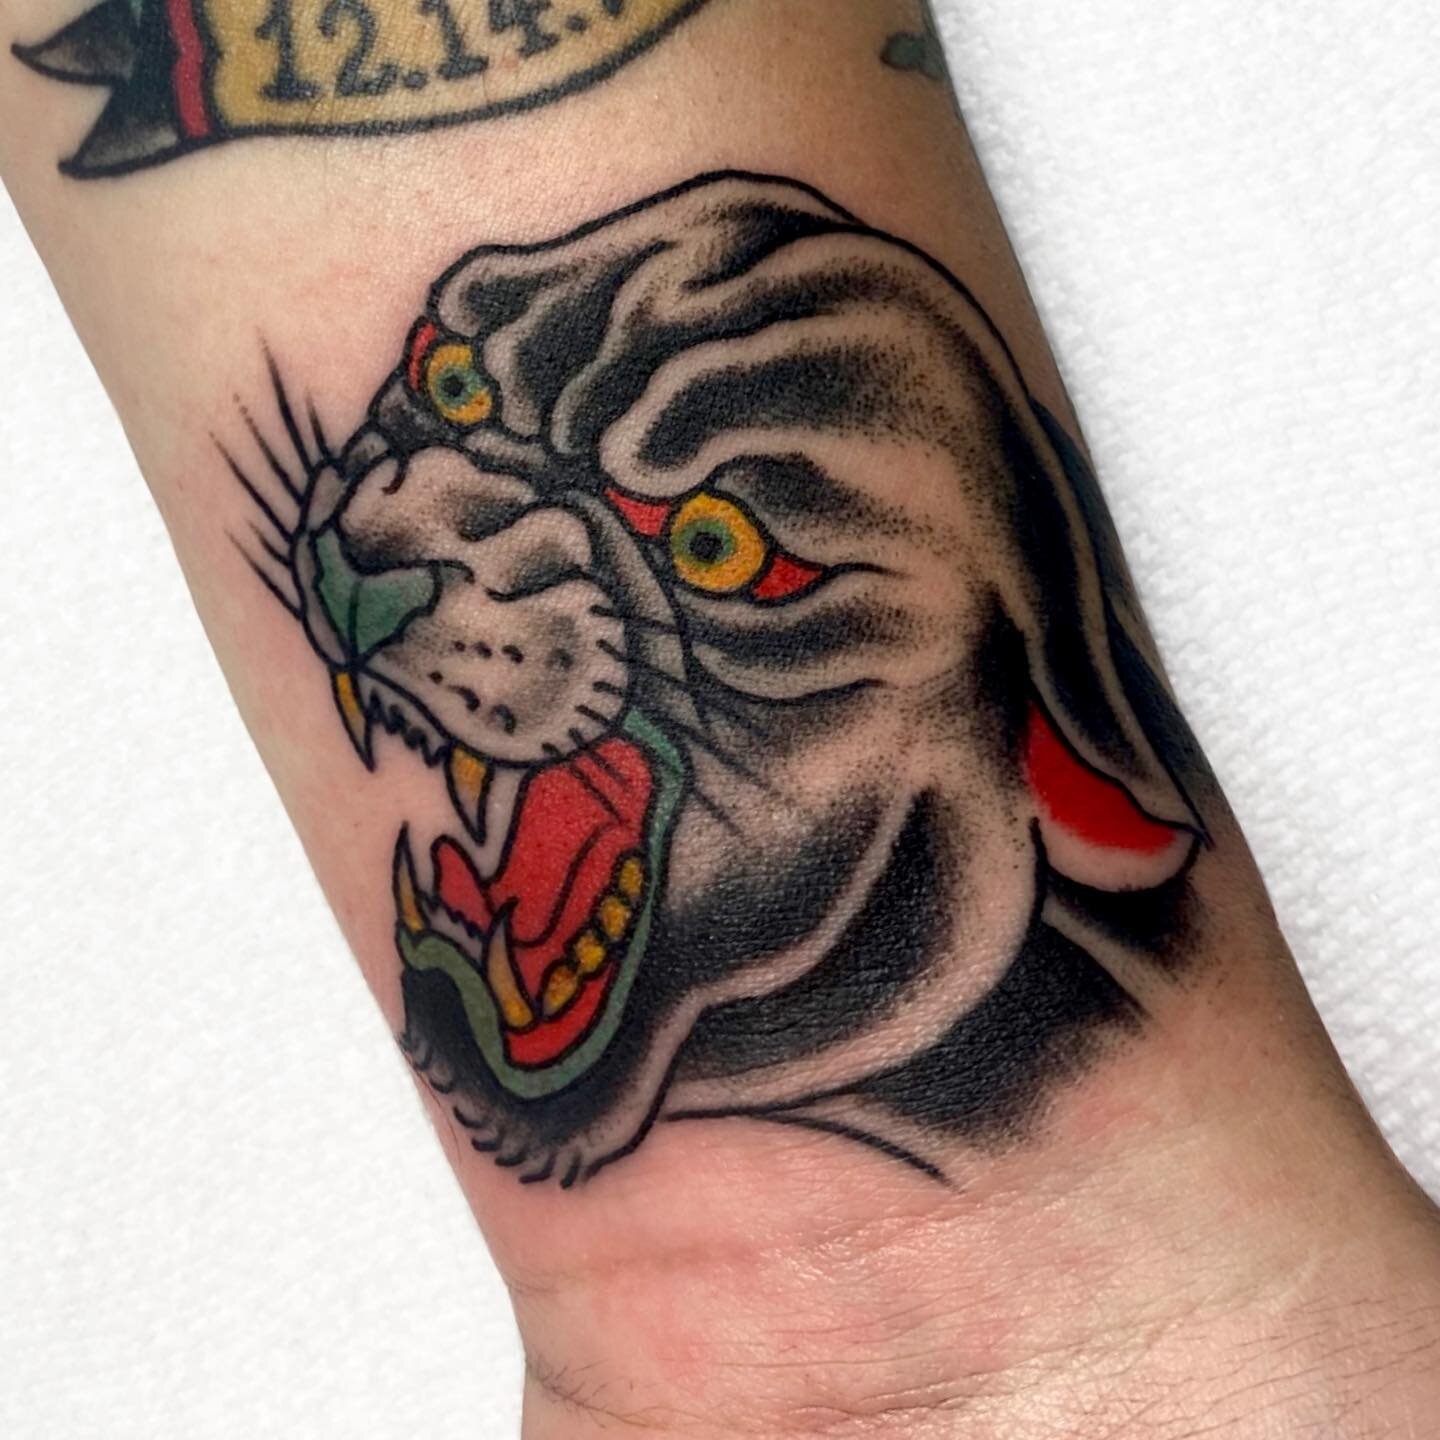 BIG CAT DAY POST: HERES A FEW KILLER CATS ON SOME KILLER PEOPLE! @enso_tattoo quickly put this day together led by @noumenonicon / @oldzakwill and we had a blast. If people dig it we will try and make it a yearly. We will expand concepts to spread th